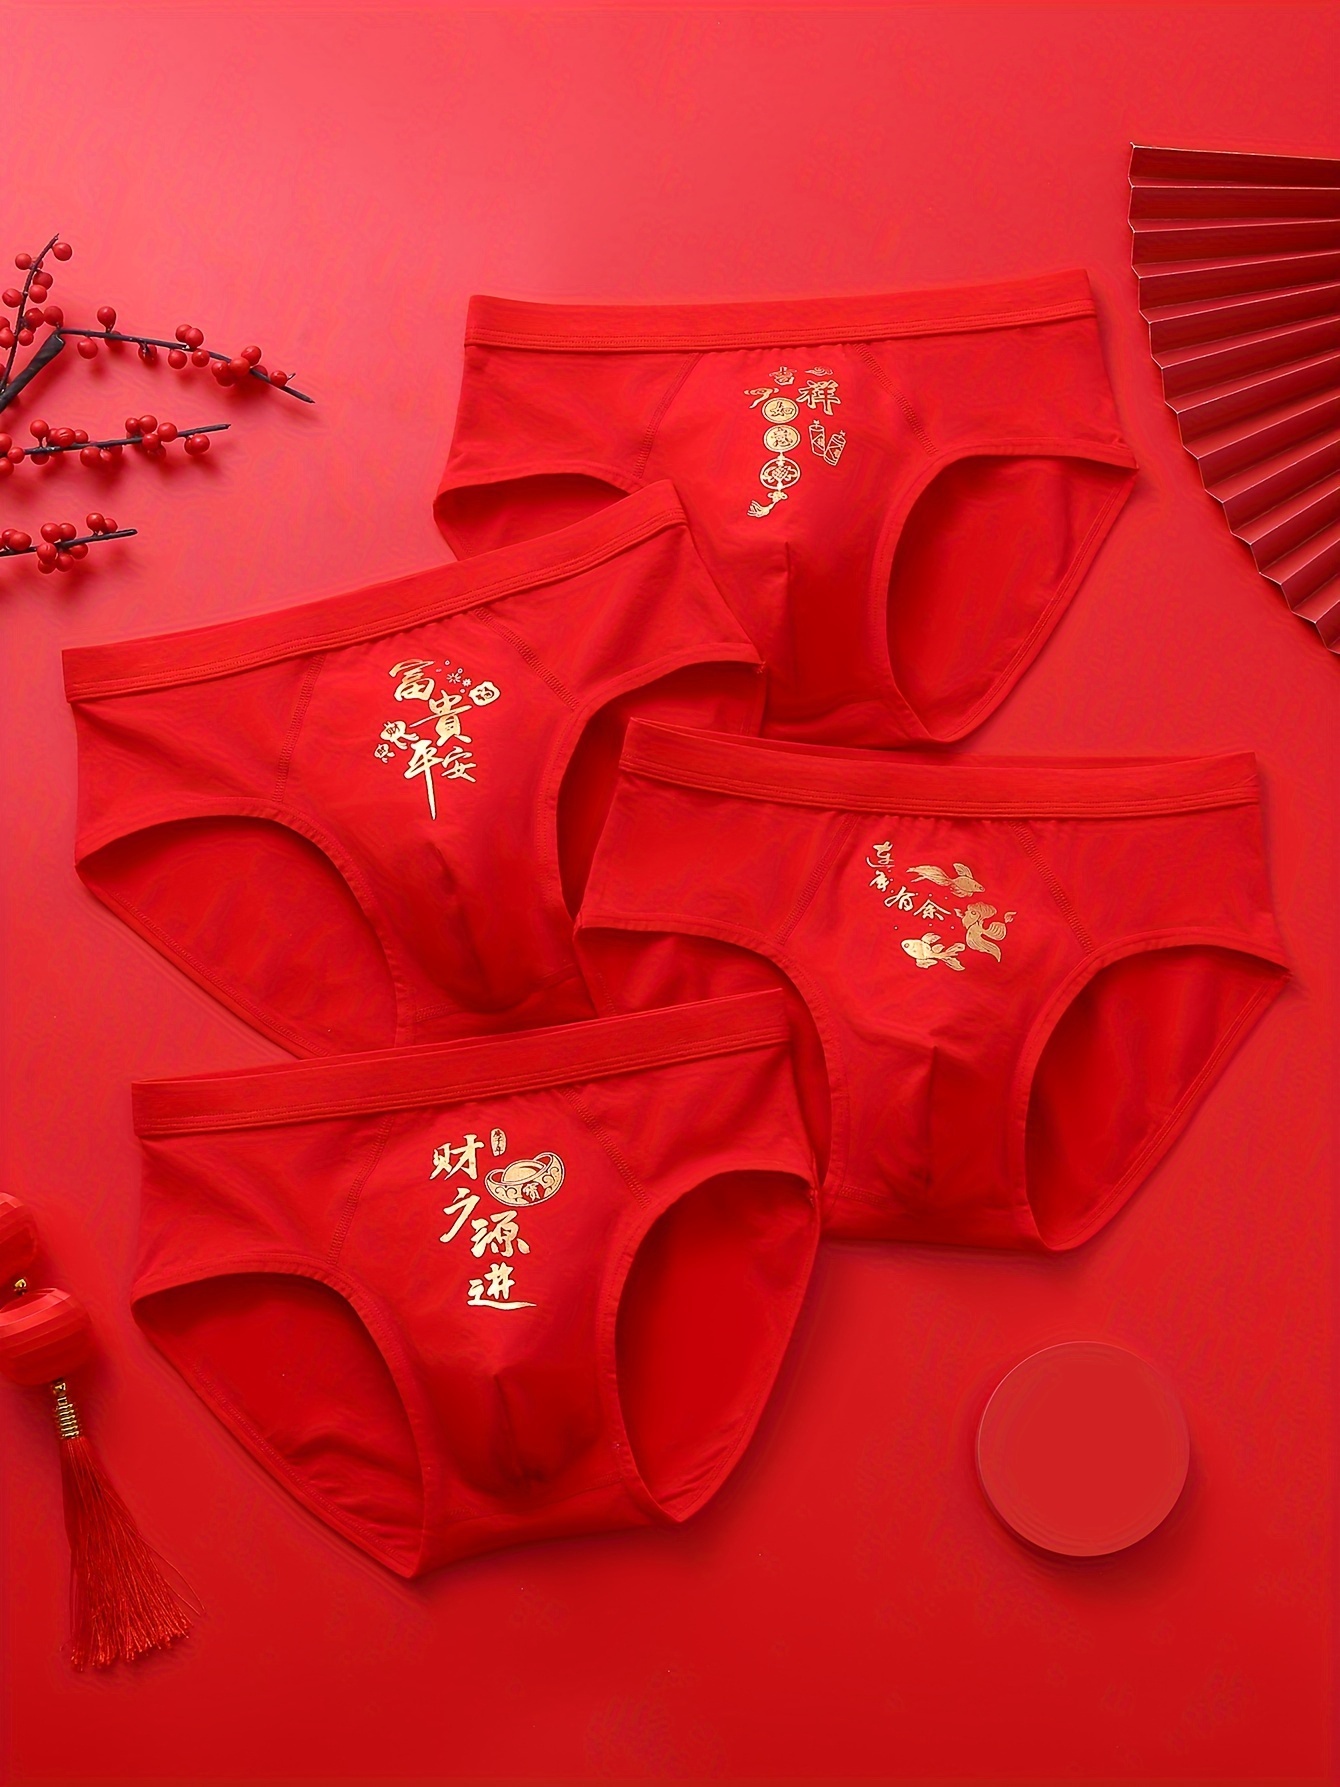 Cheap 4 Pcs Red Color Men Underwear Cotton Boxers Shorts Underpants Boy Undies  Knickers Homme Trunks Year of the Dragon New Year Gifts